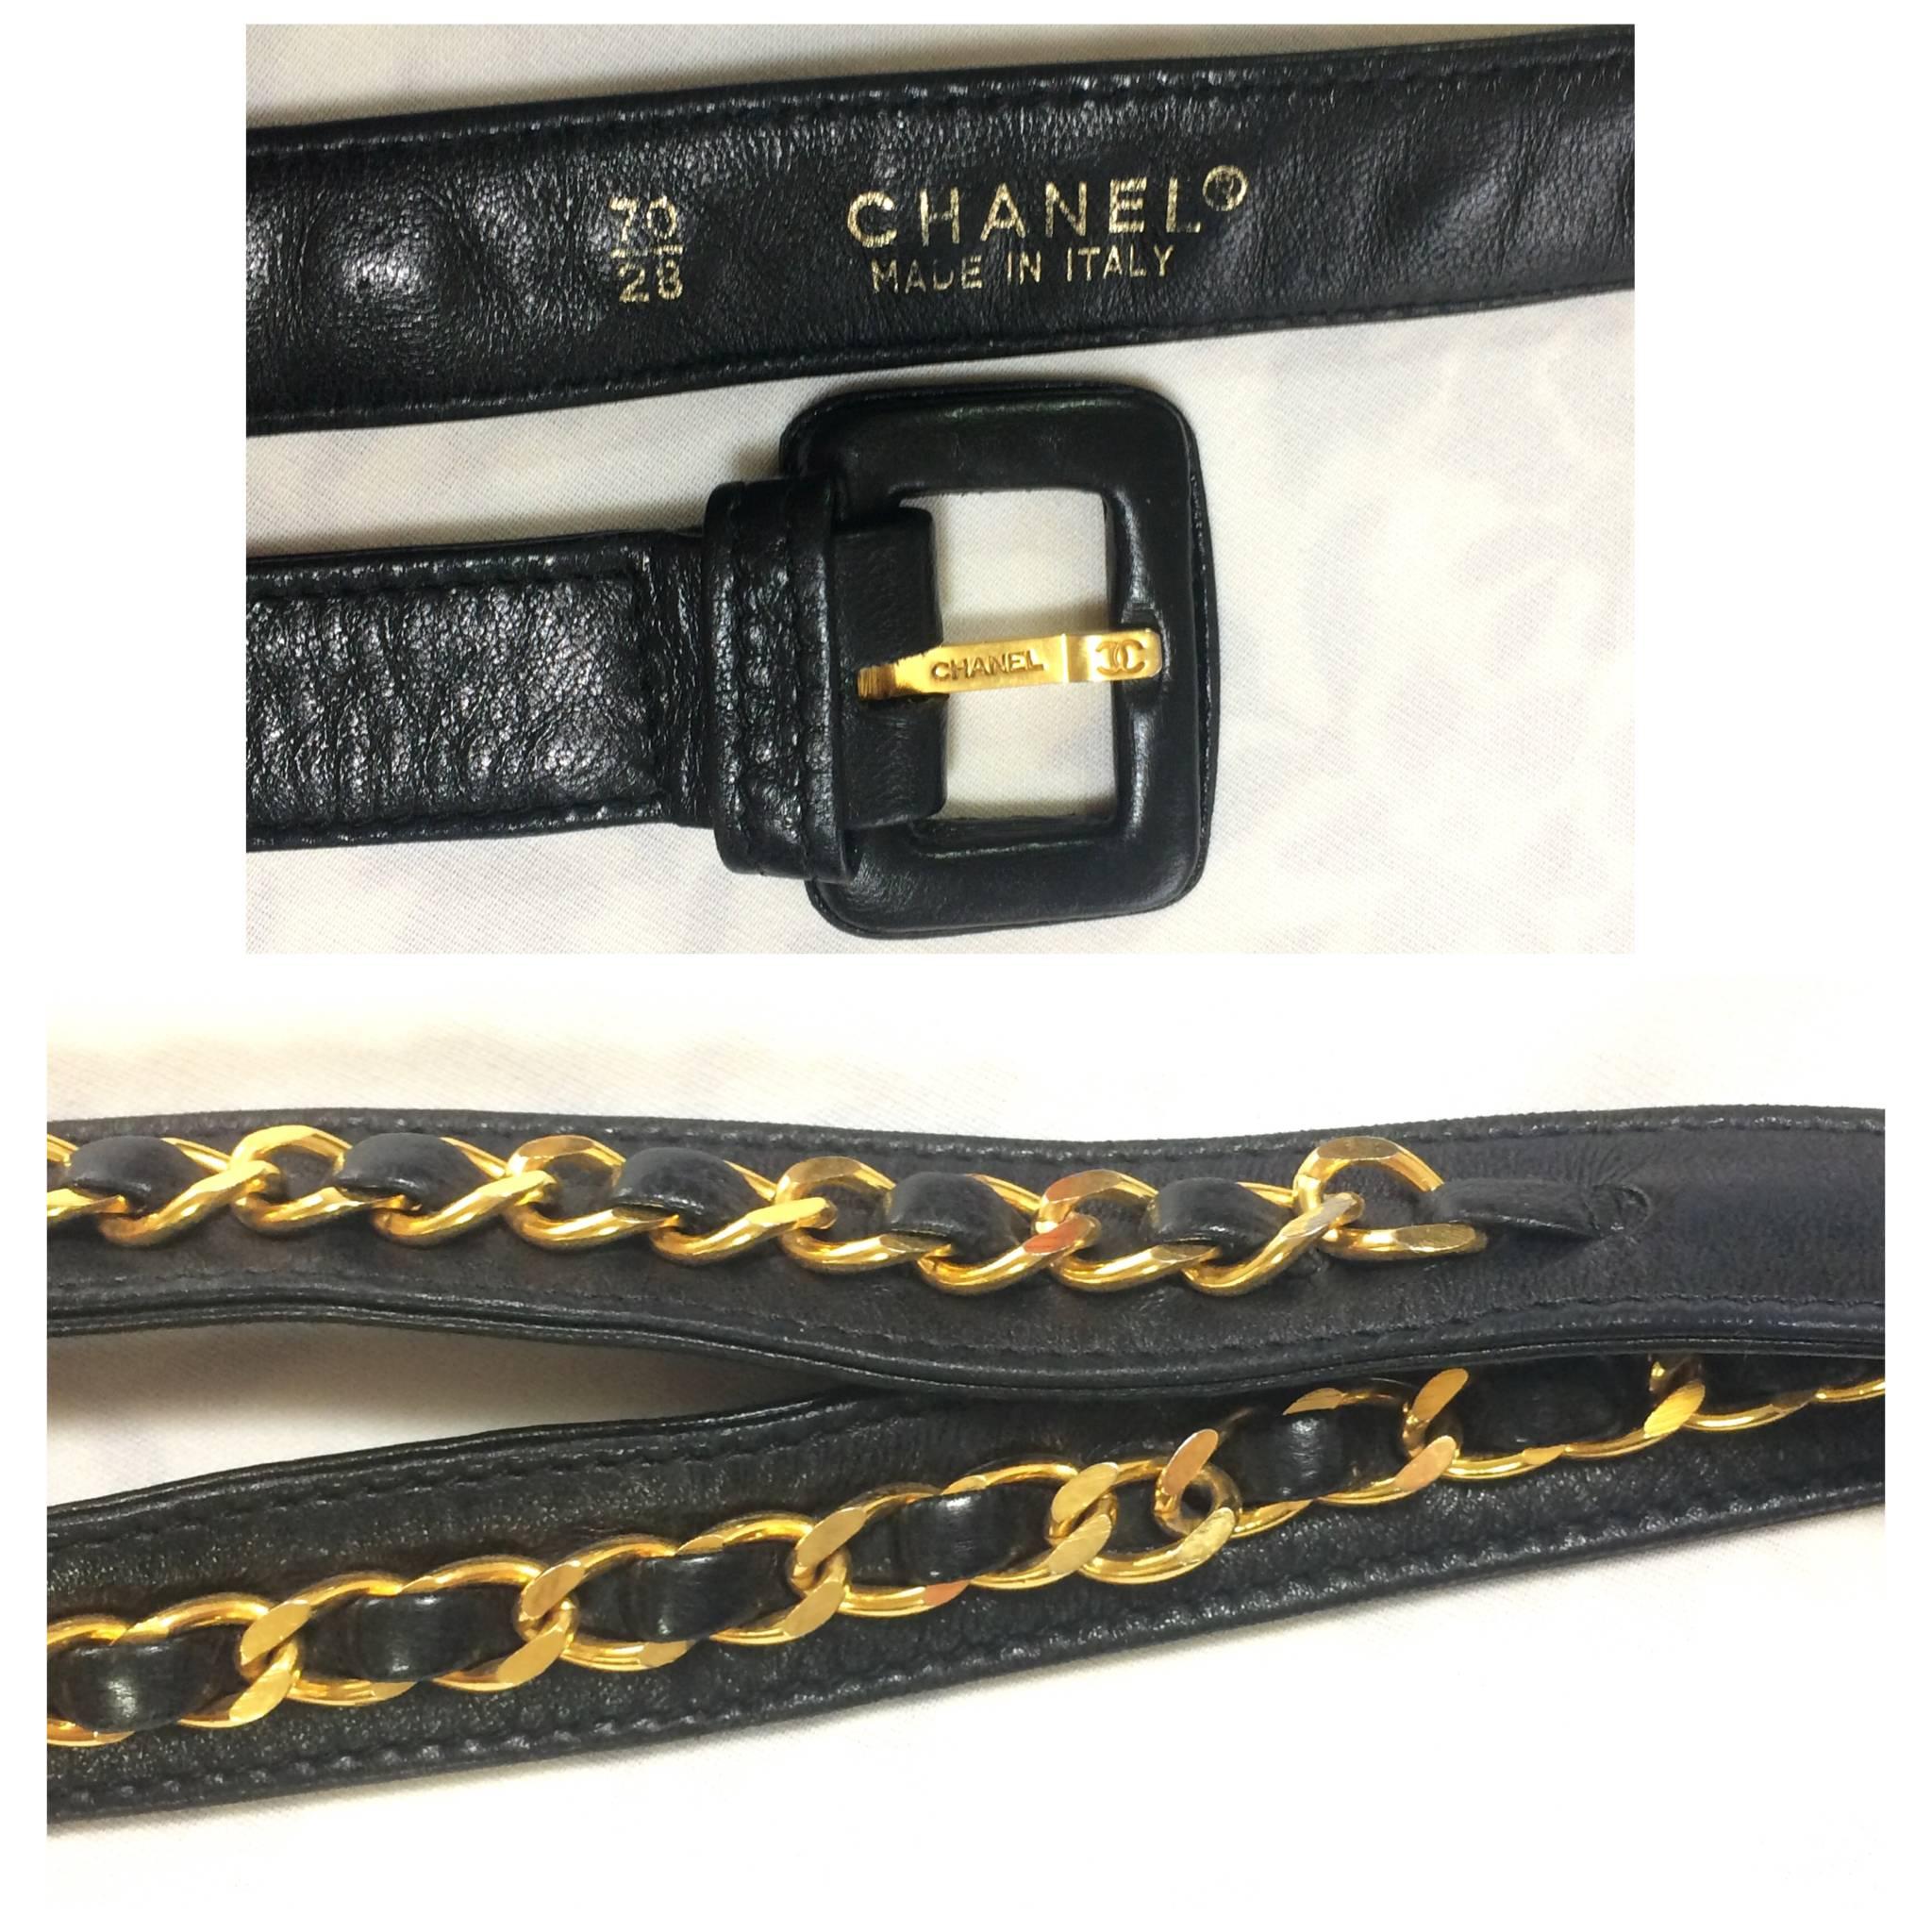 Vintage CHANEL black waist purse, fanny pack with golden CC and chain belt. 4